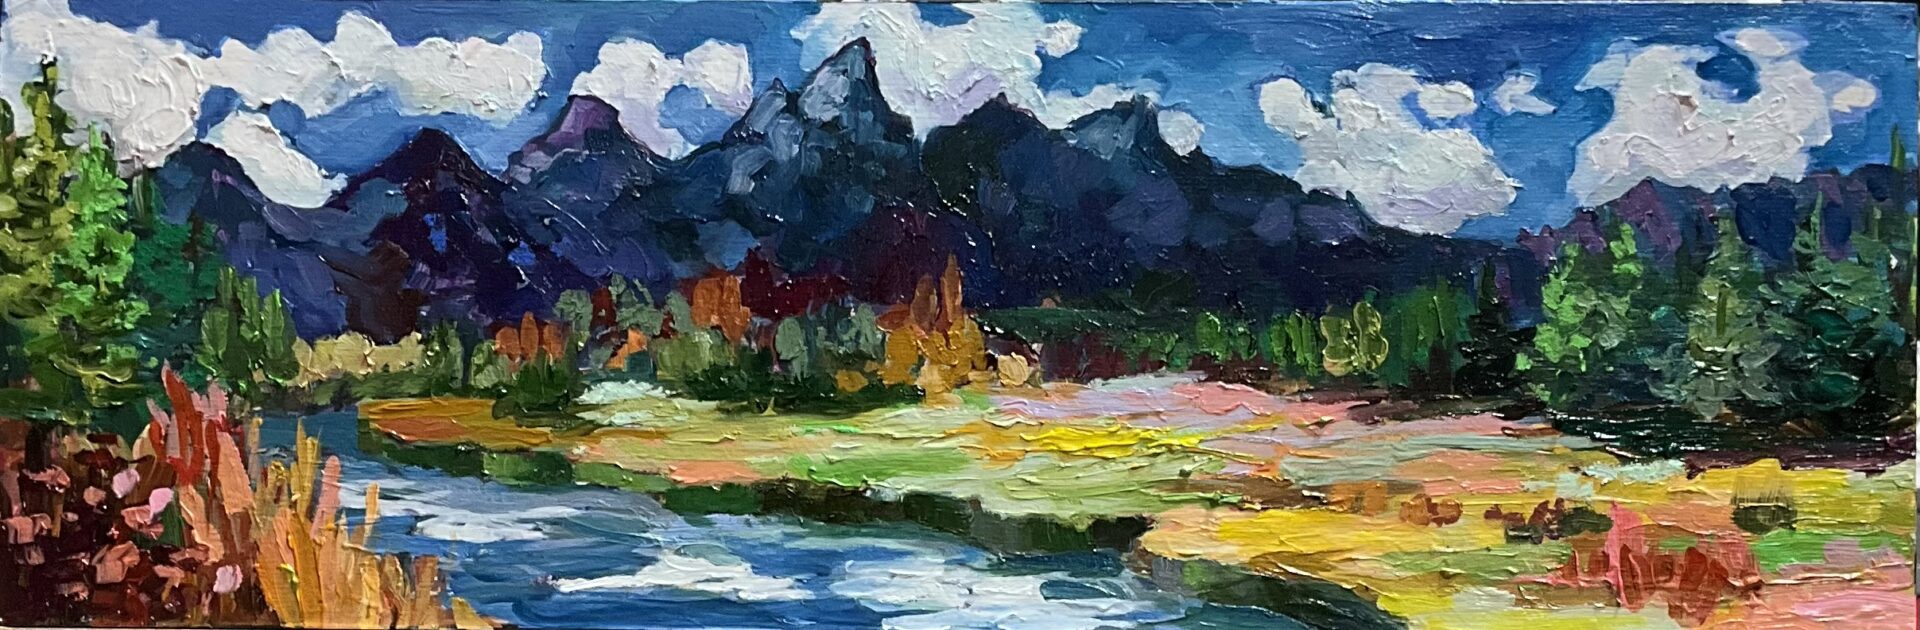 Oil painting of a mountain landscape.